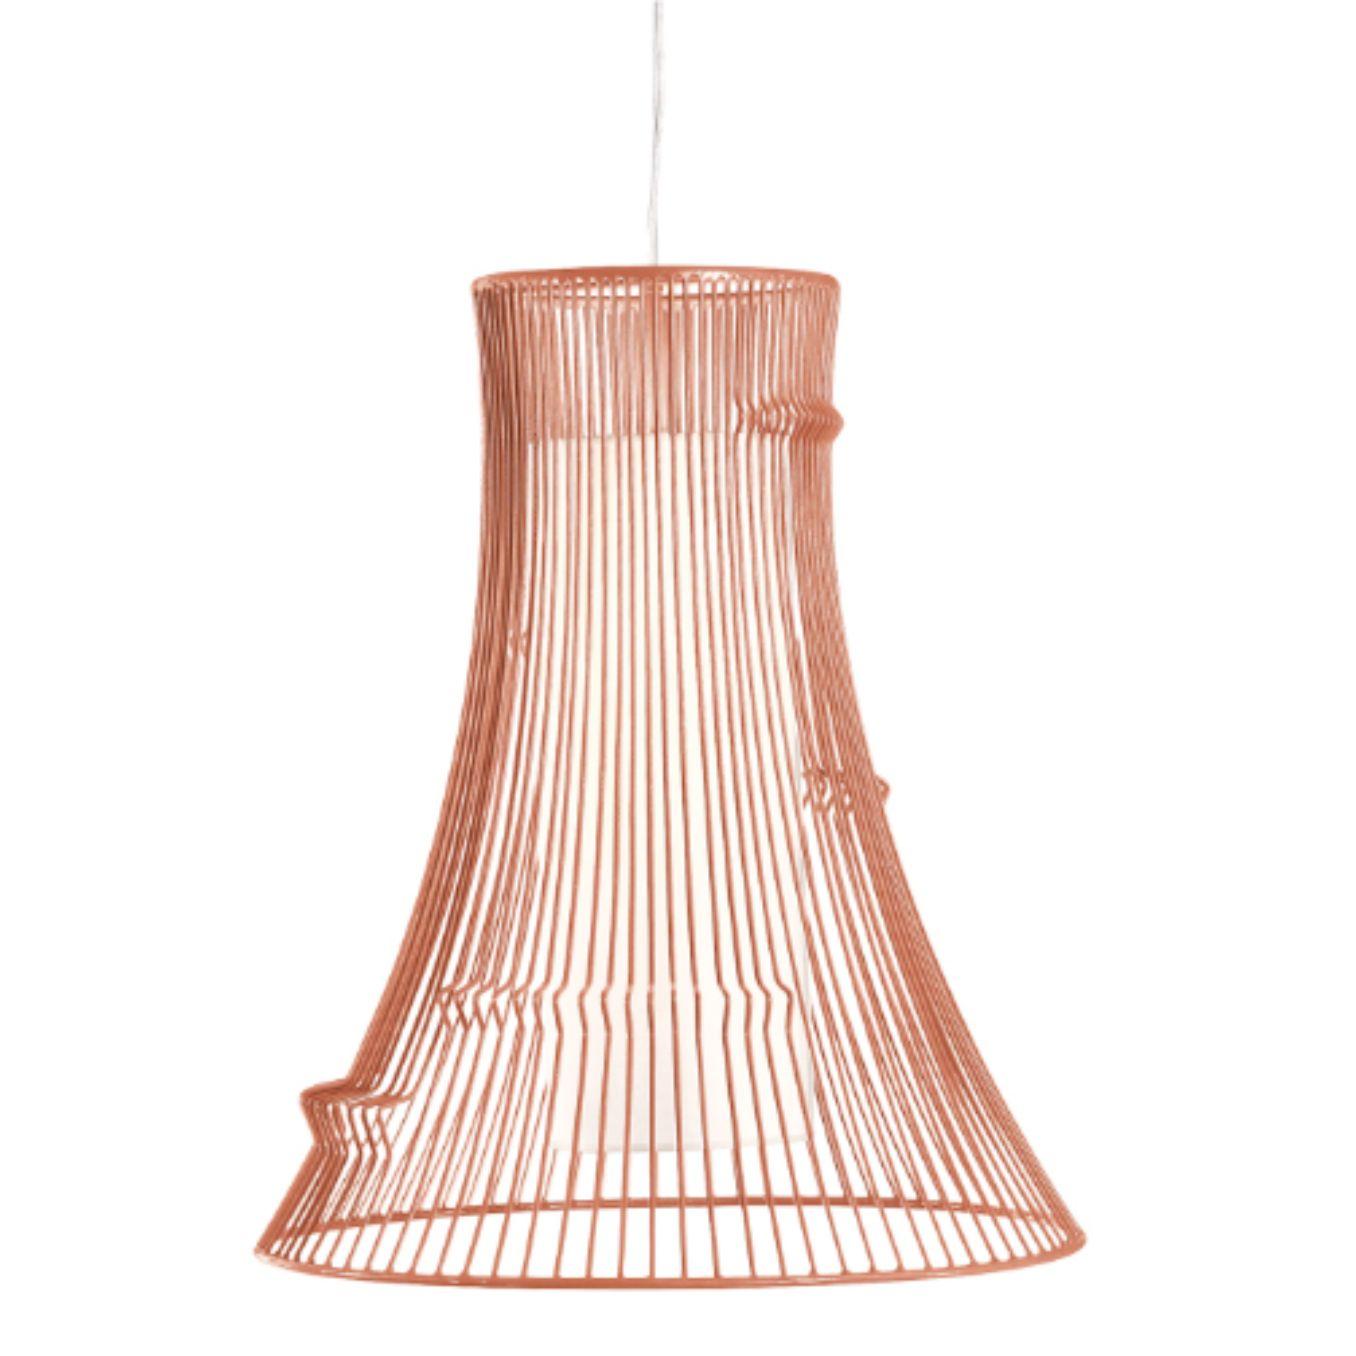 Salmon Extrude Suspension lamp by Dooq
Dimensions: W 60 x D 60 x H 70 cm
Materials: lacquered metal
Abat-jour: cotton
Also available in different colors and materials. 

Information:
230V/50Hz
E27/1x20W LED
120V/60Hz
E26/1x15W LED
bulb not